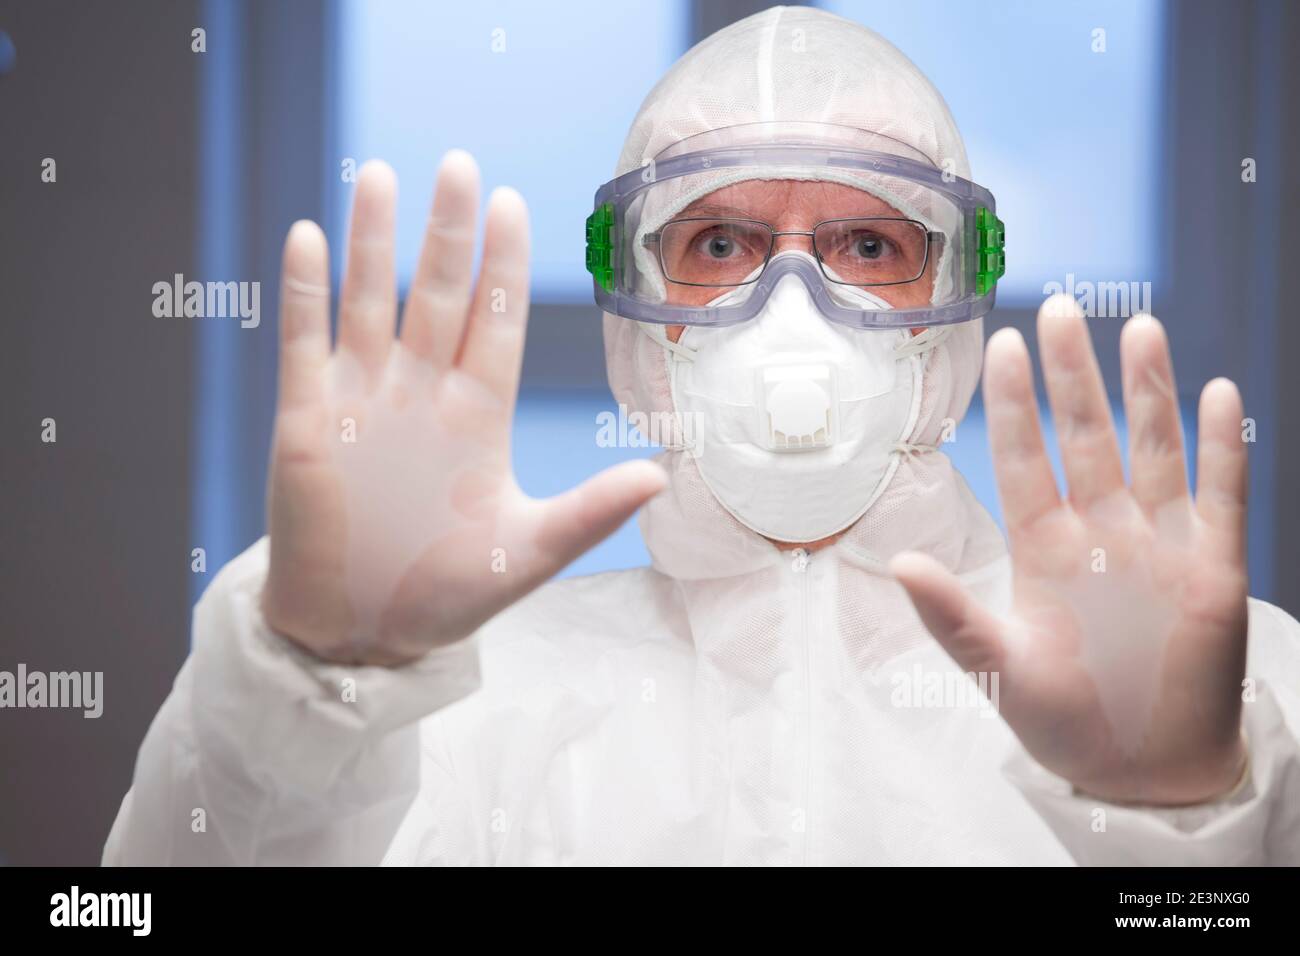 Doctor or scientist with protective clothing gesturing stop for covid-19 - focus on the face Stock Photo